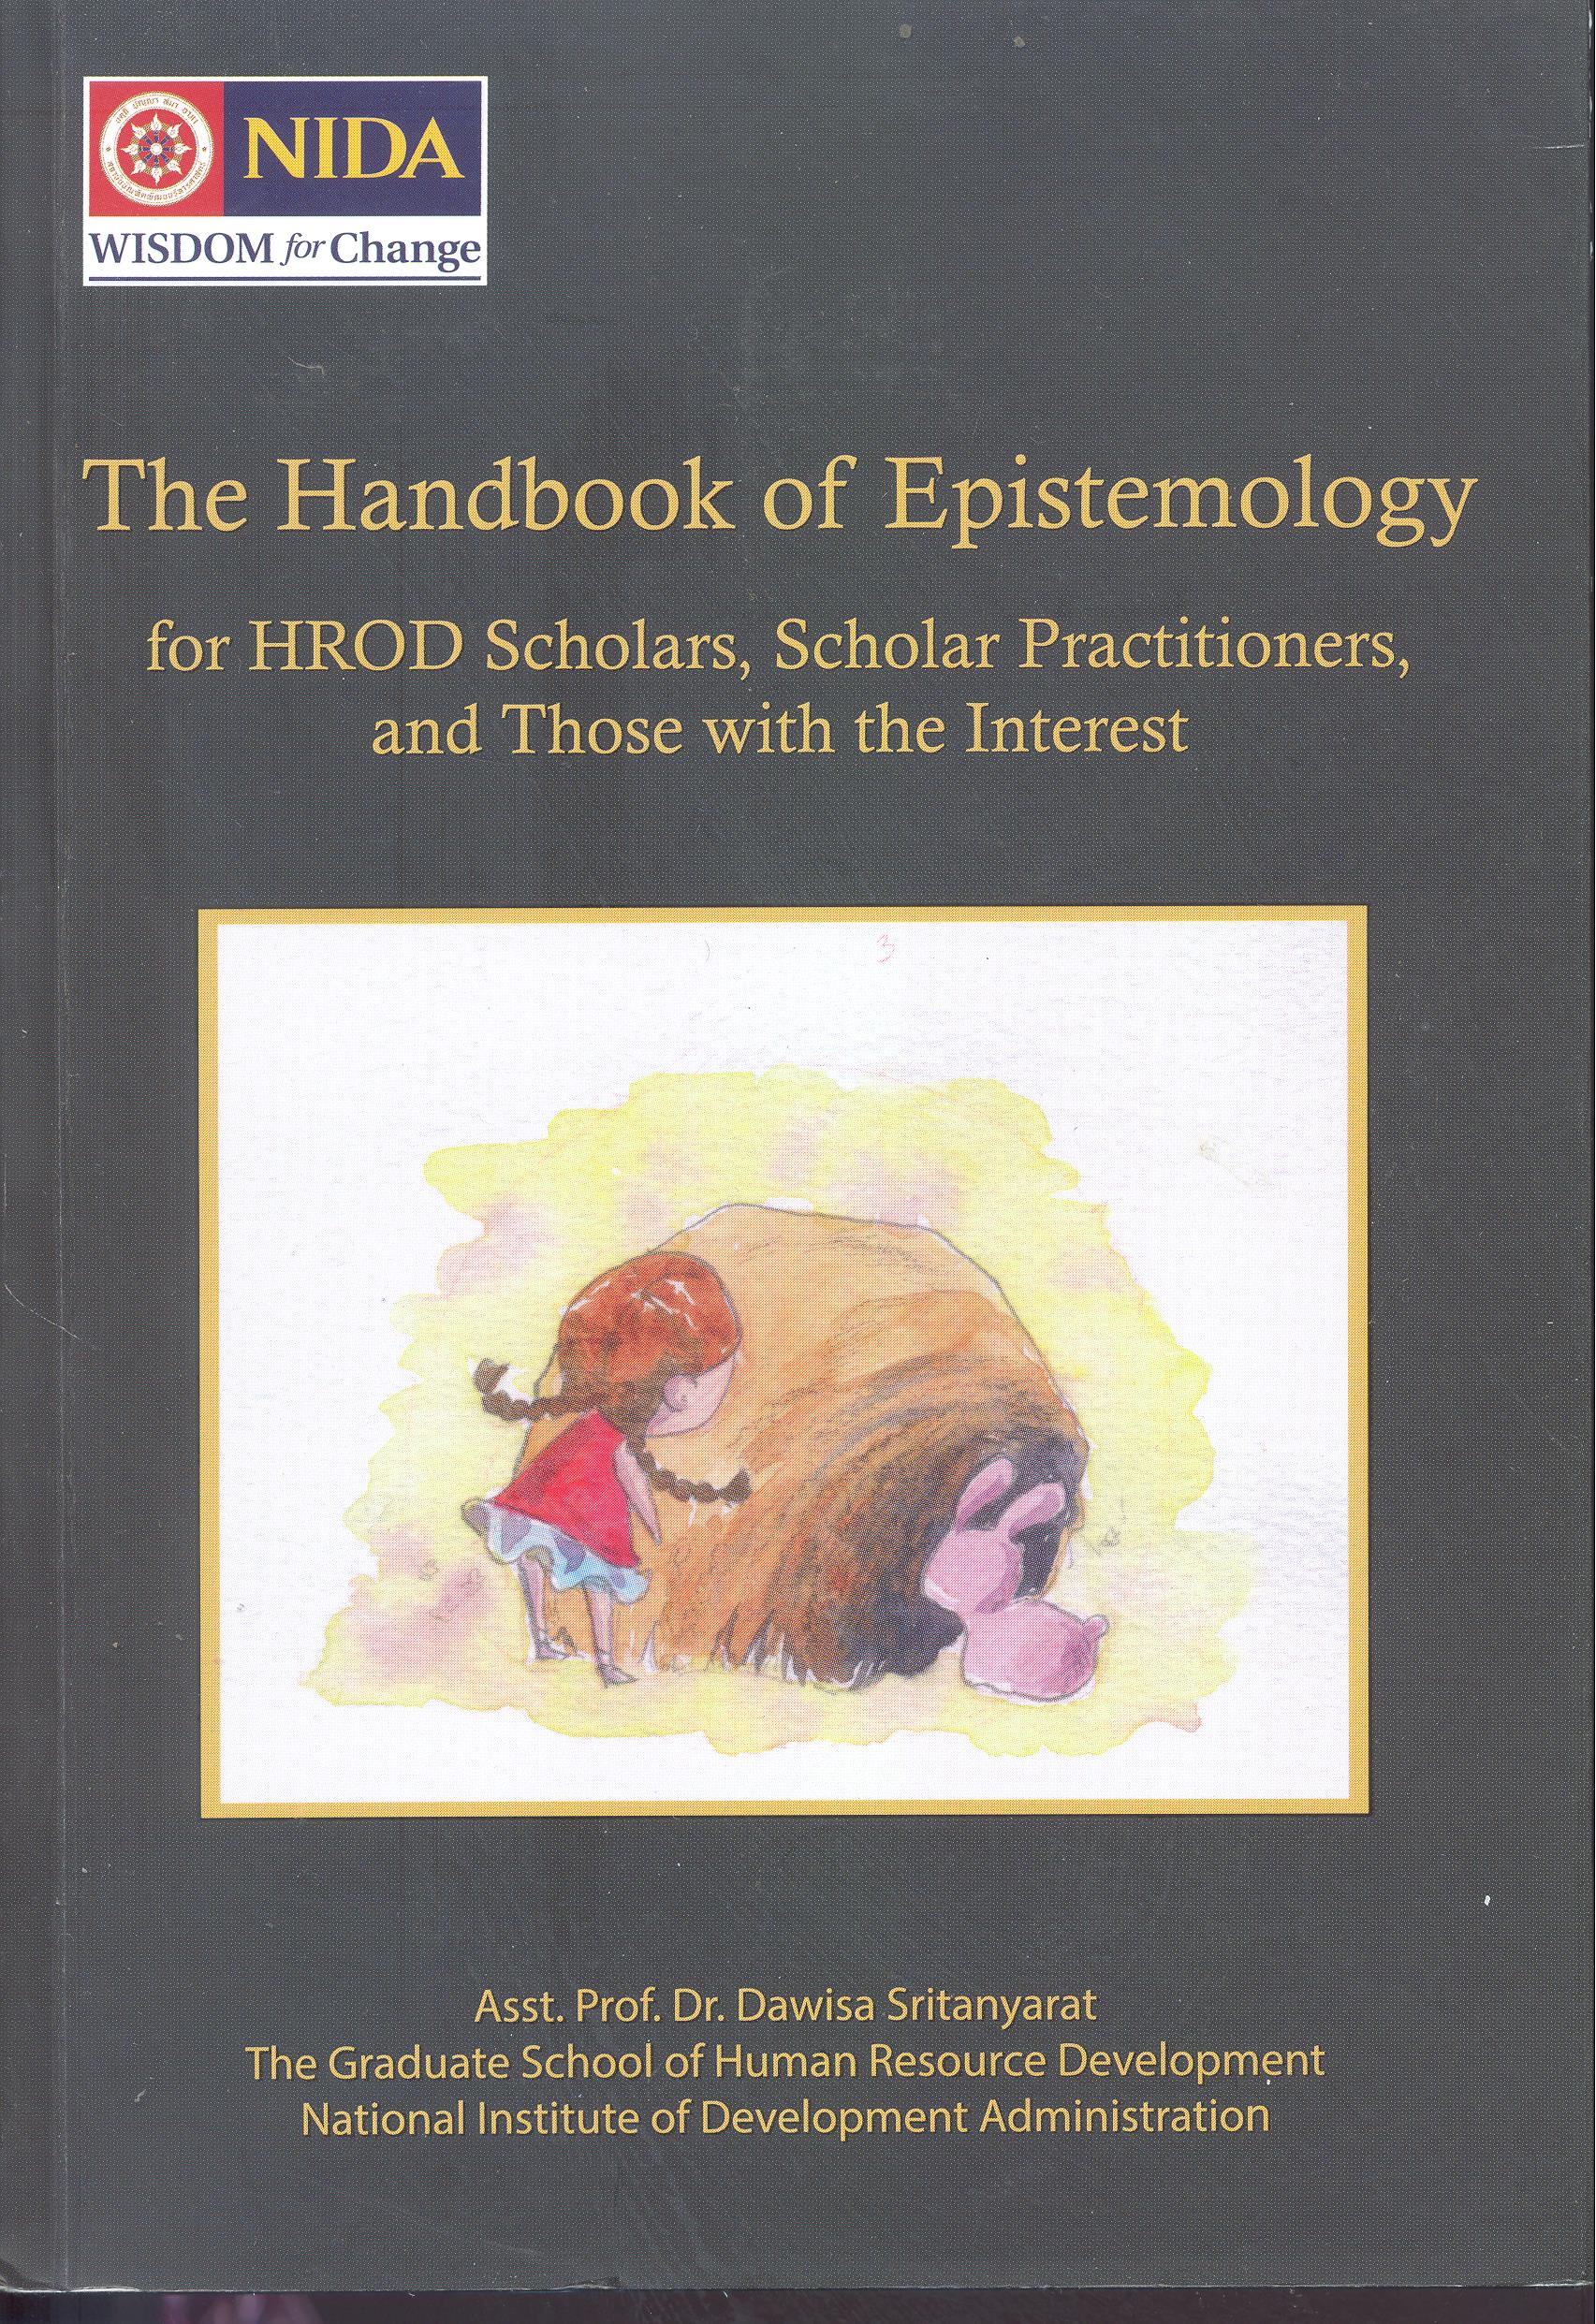 The handbook of epistemology for HROD scholars, scholar practitioners, and those with the interest